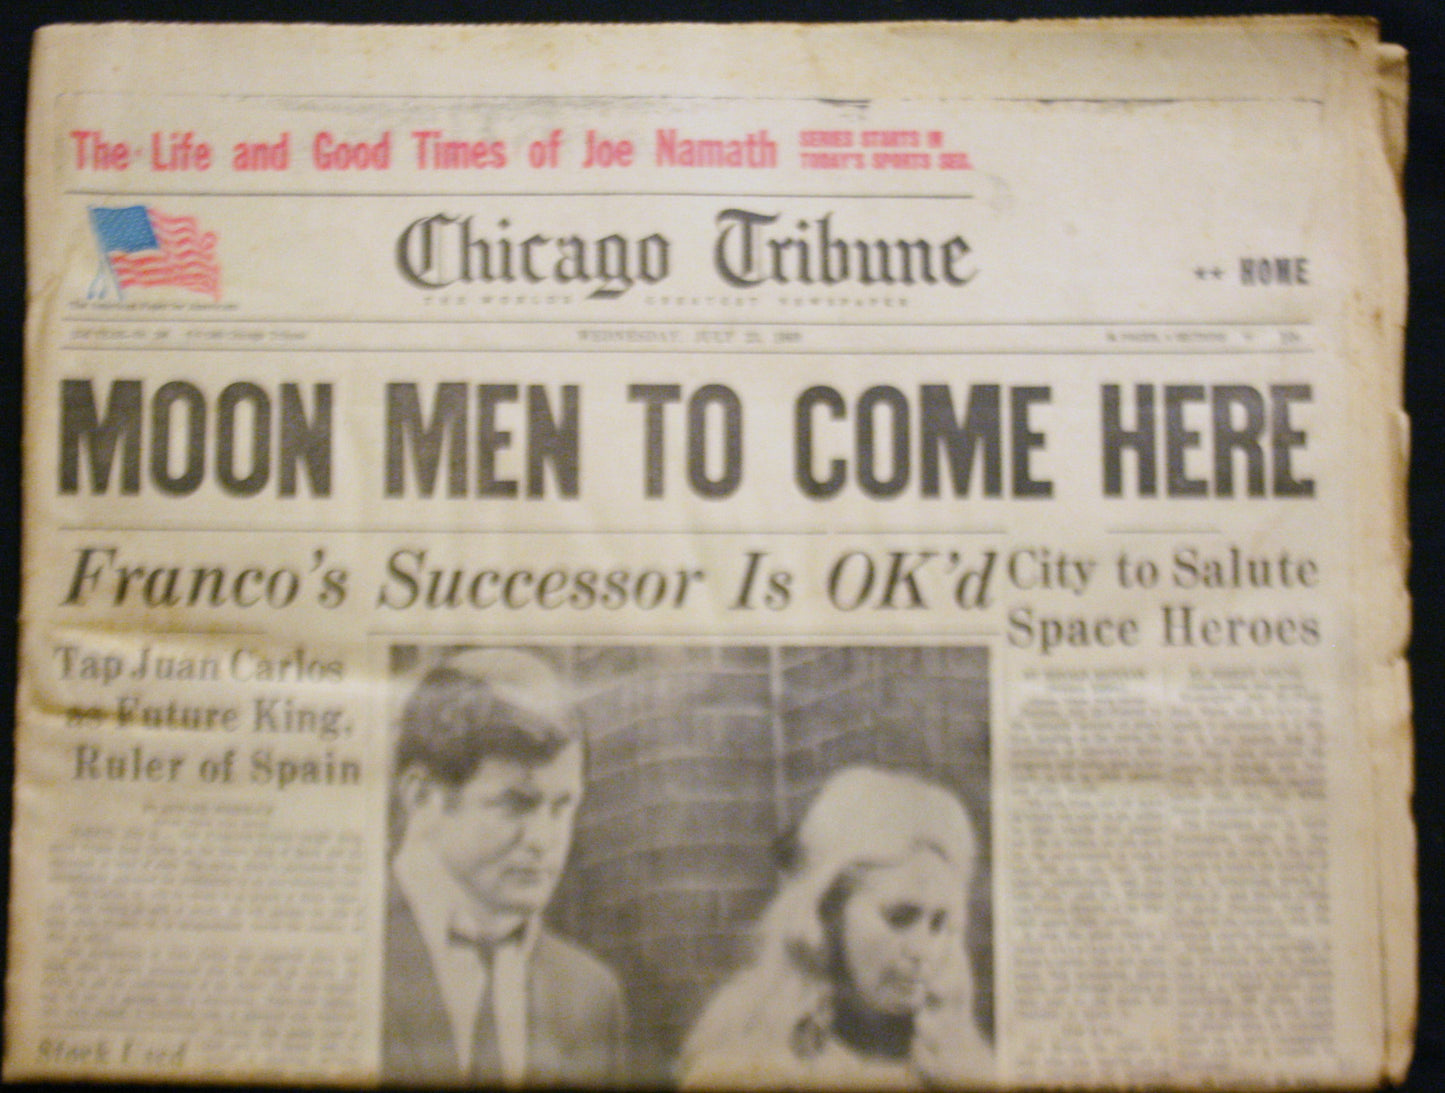 07 23 1969 Moon Men Ted Kennedy